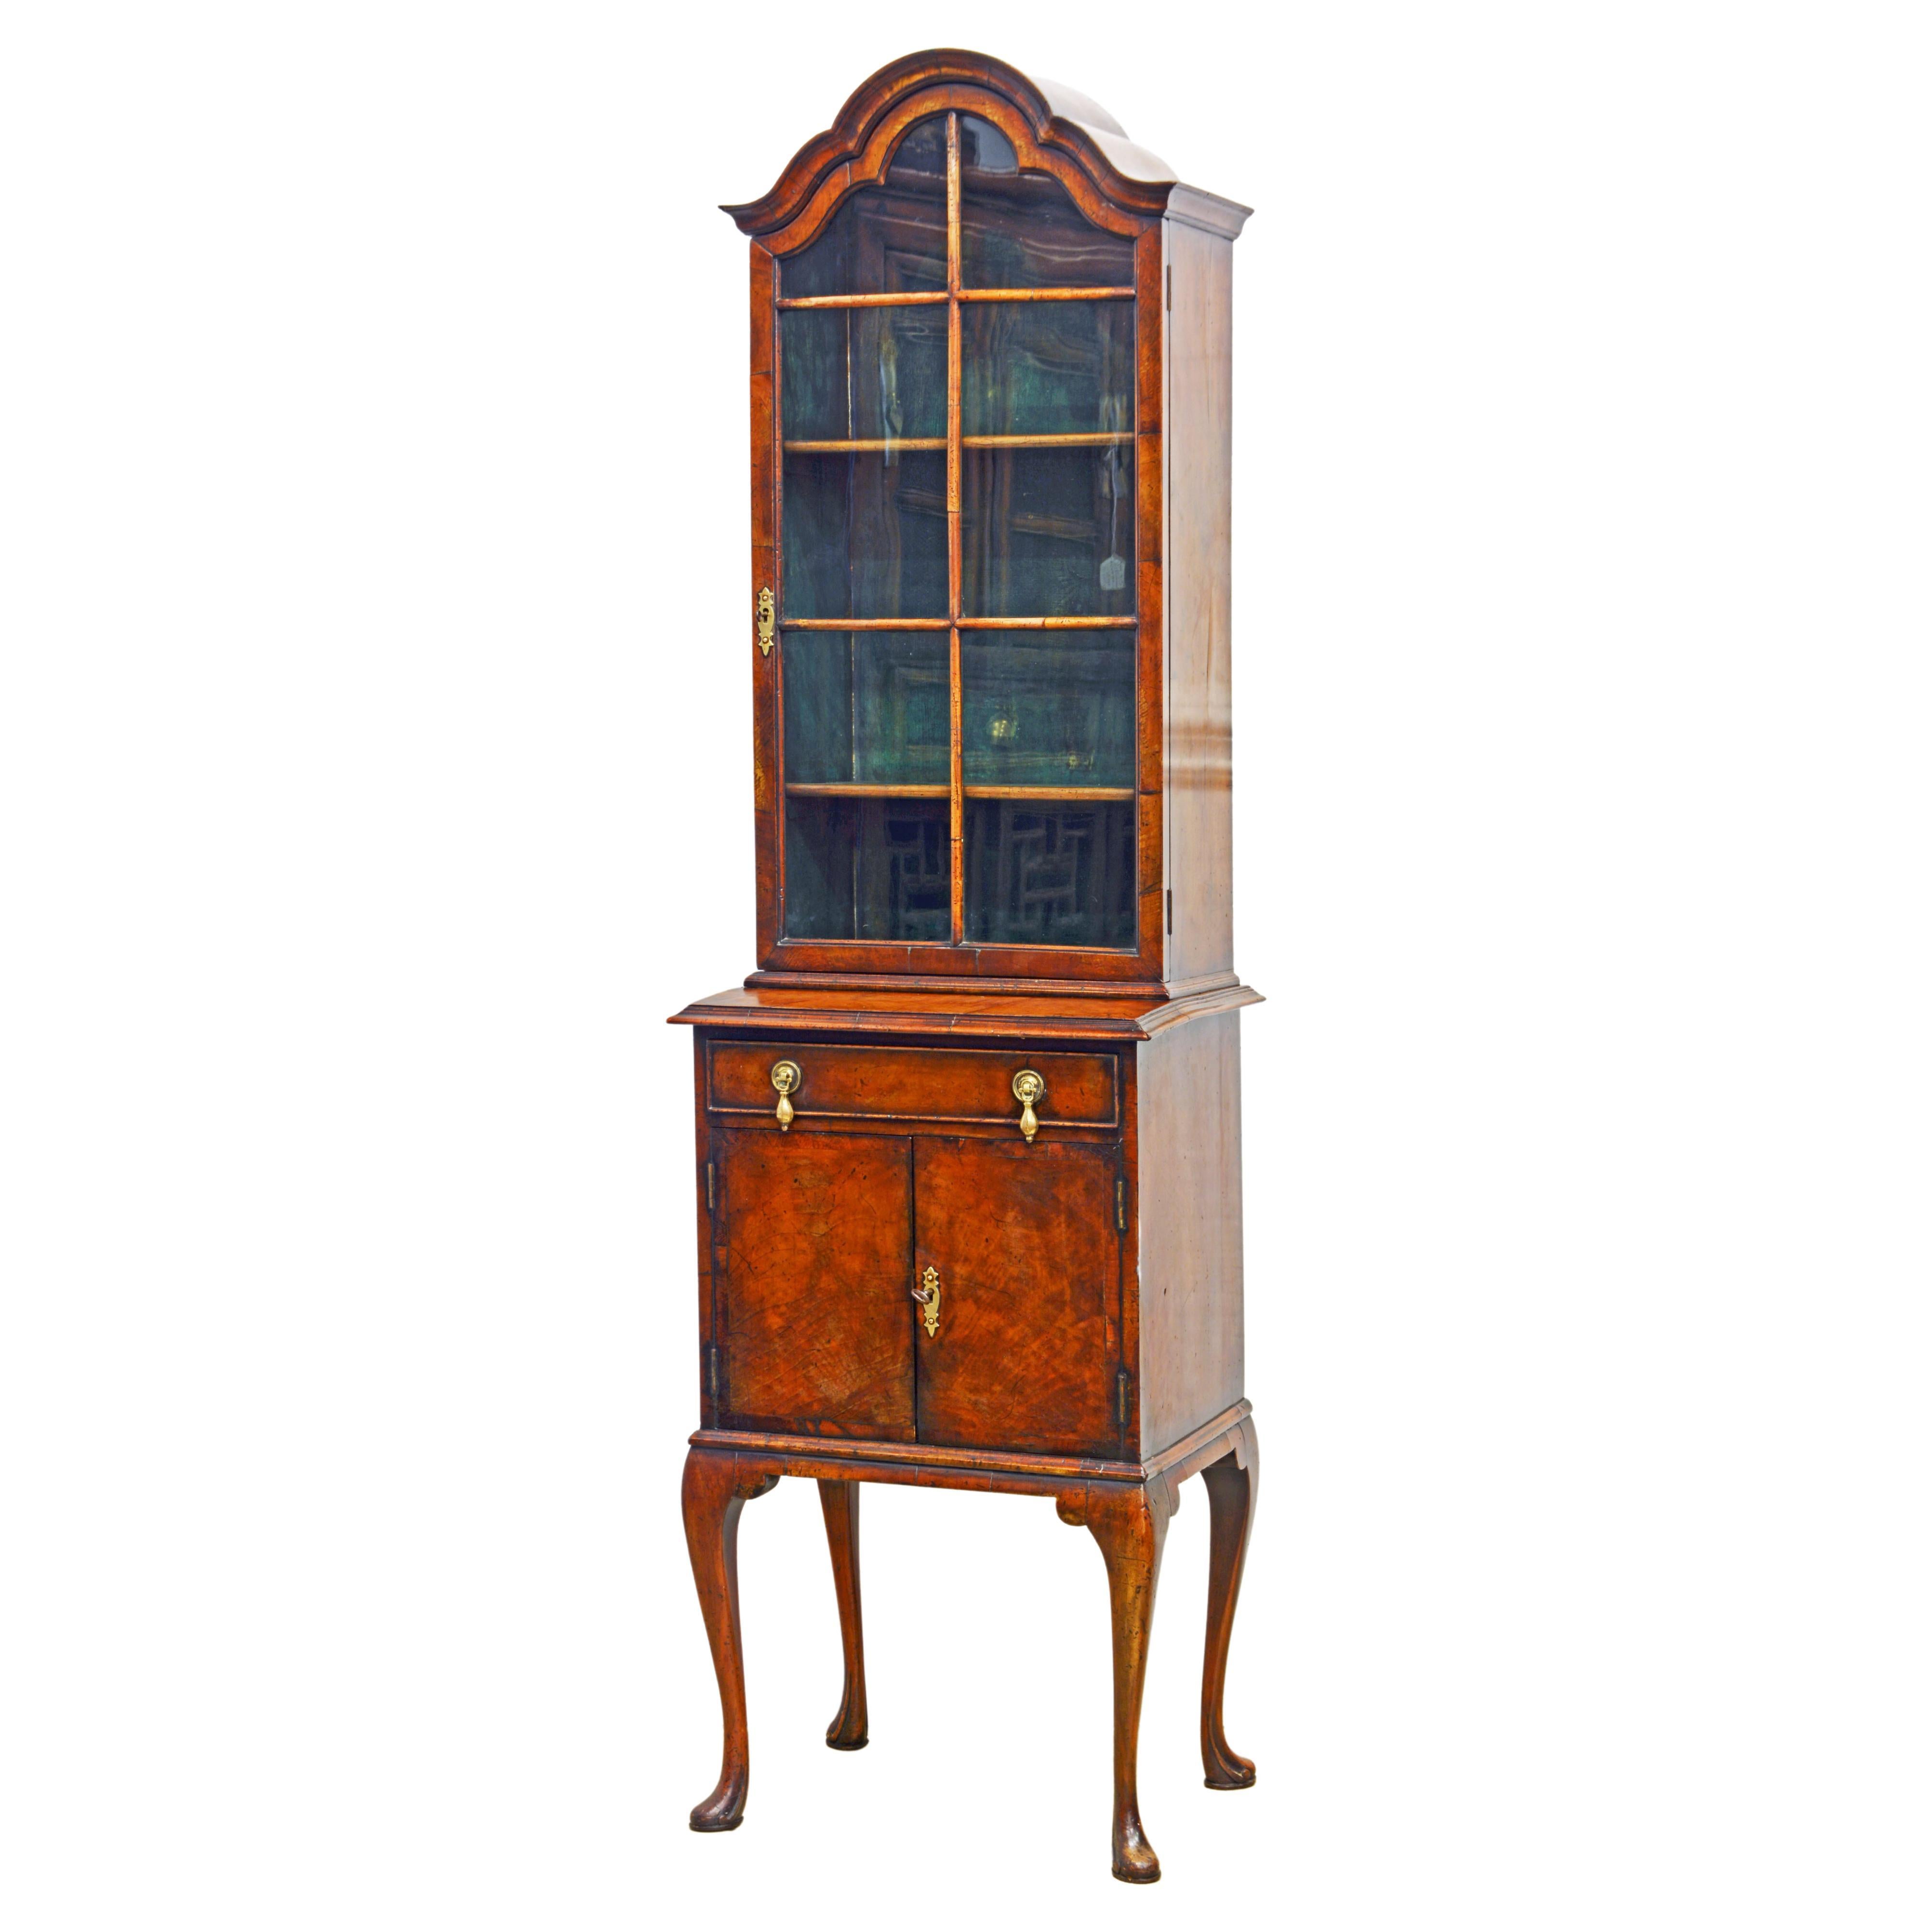 Petite English Queen Anne Style Burled Walnut Display/Curio Cabinet, Late 19th C